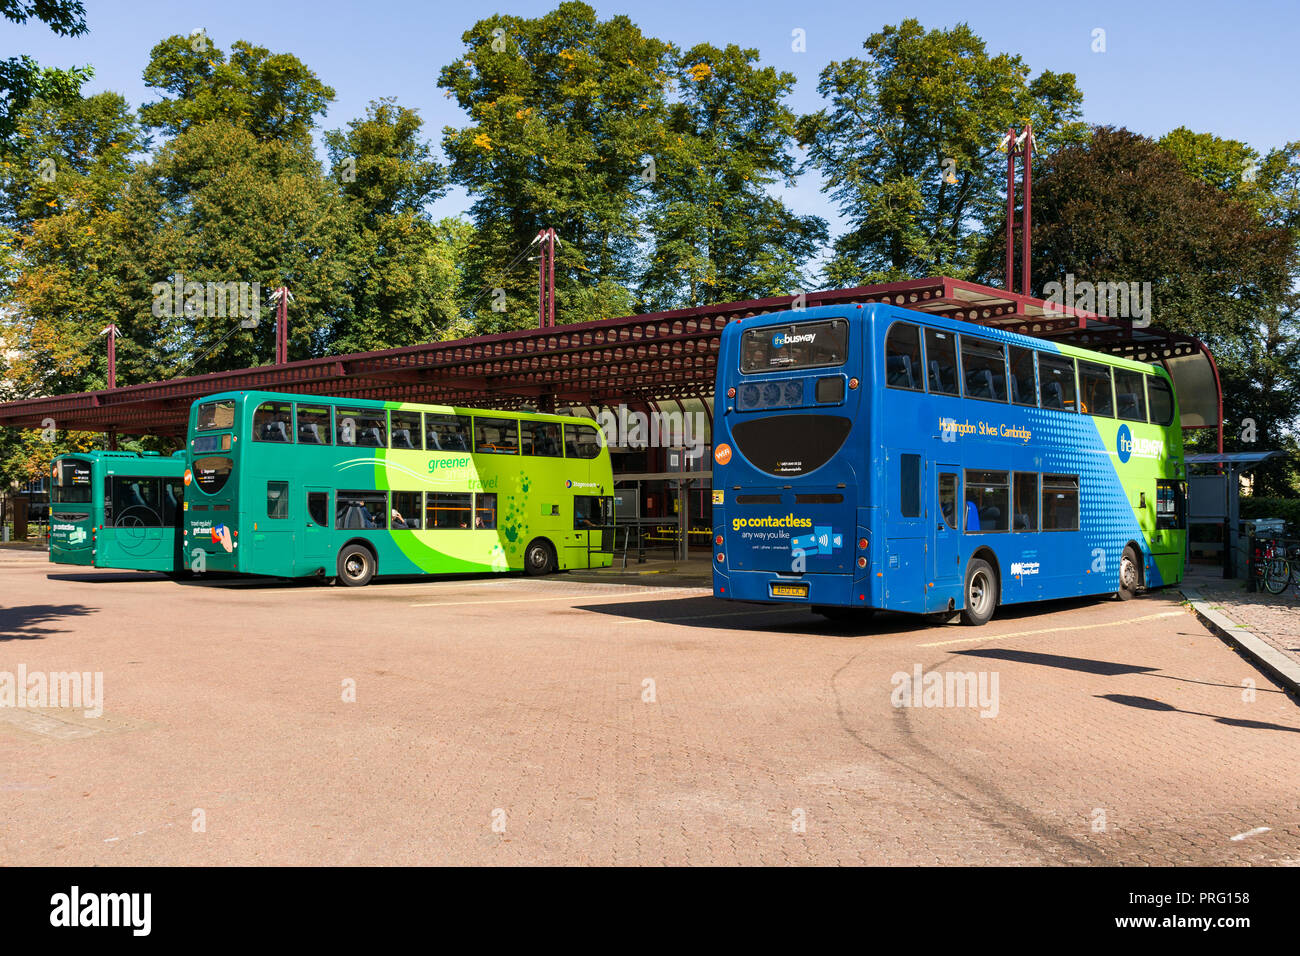 Drummer street bus station with several buses in bays, Cambridge, UK Stock Photo